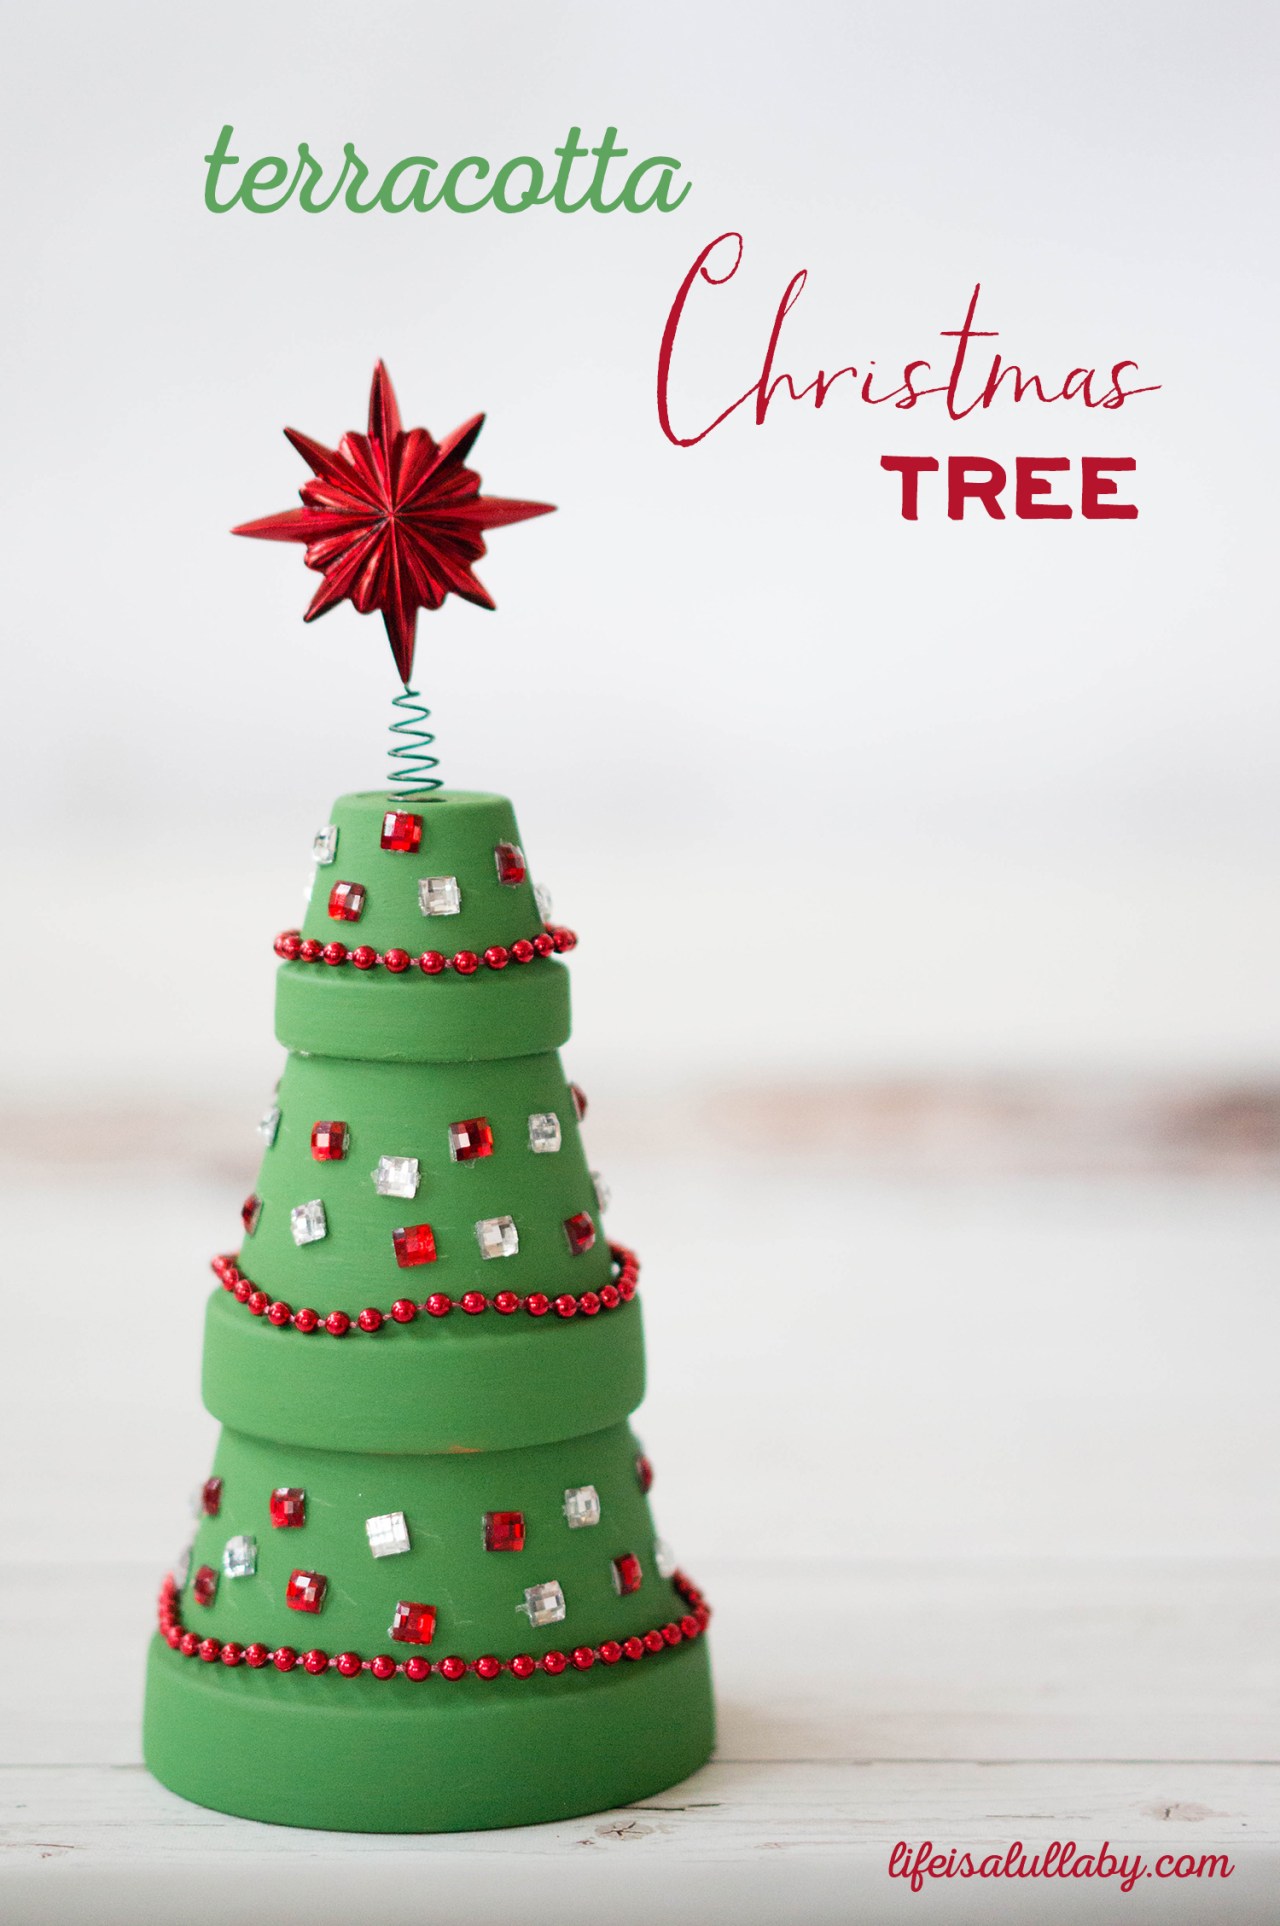 10+ Creative Clay Pot Christmas Craft Ideas - Page 2 of 2